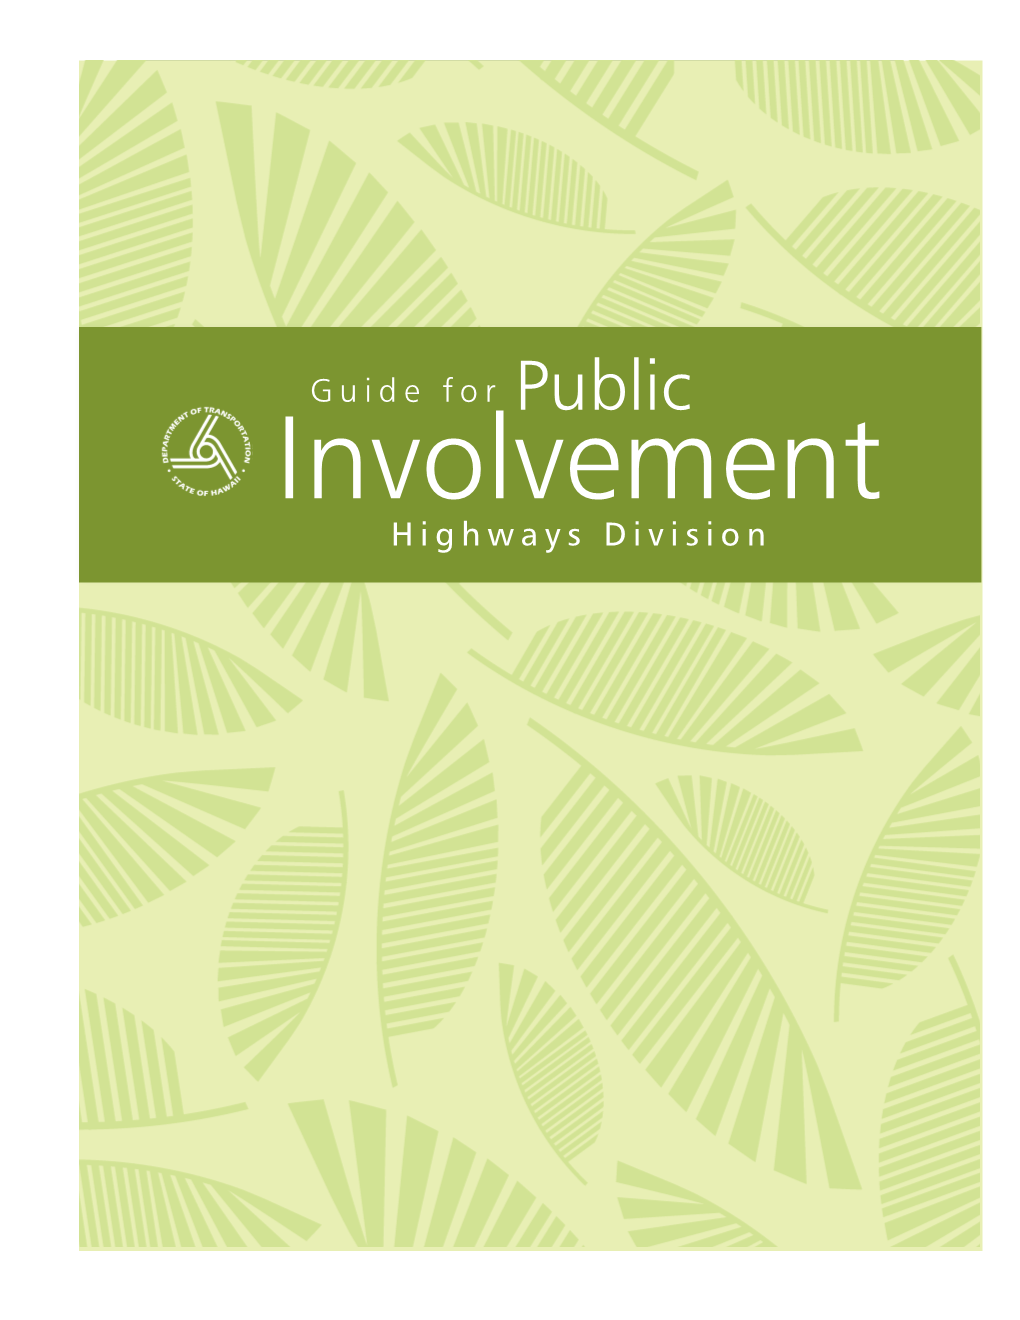 Highways Division Guide for Public Involvement Project Delivery Checklist This Document Is a Companion to the Highways Division Guide for Public Involvement